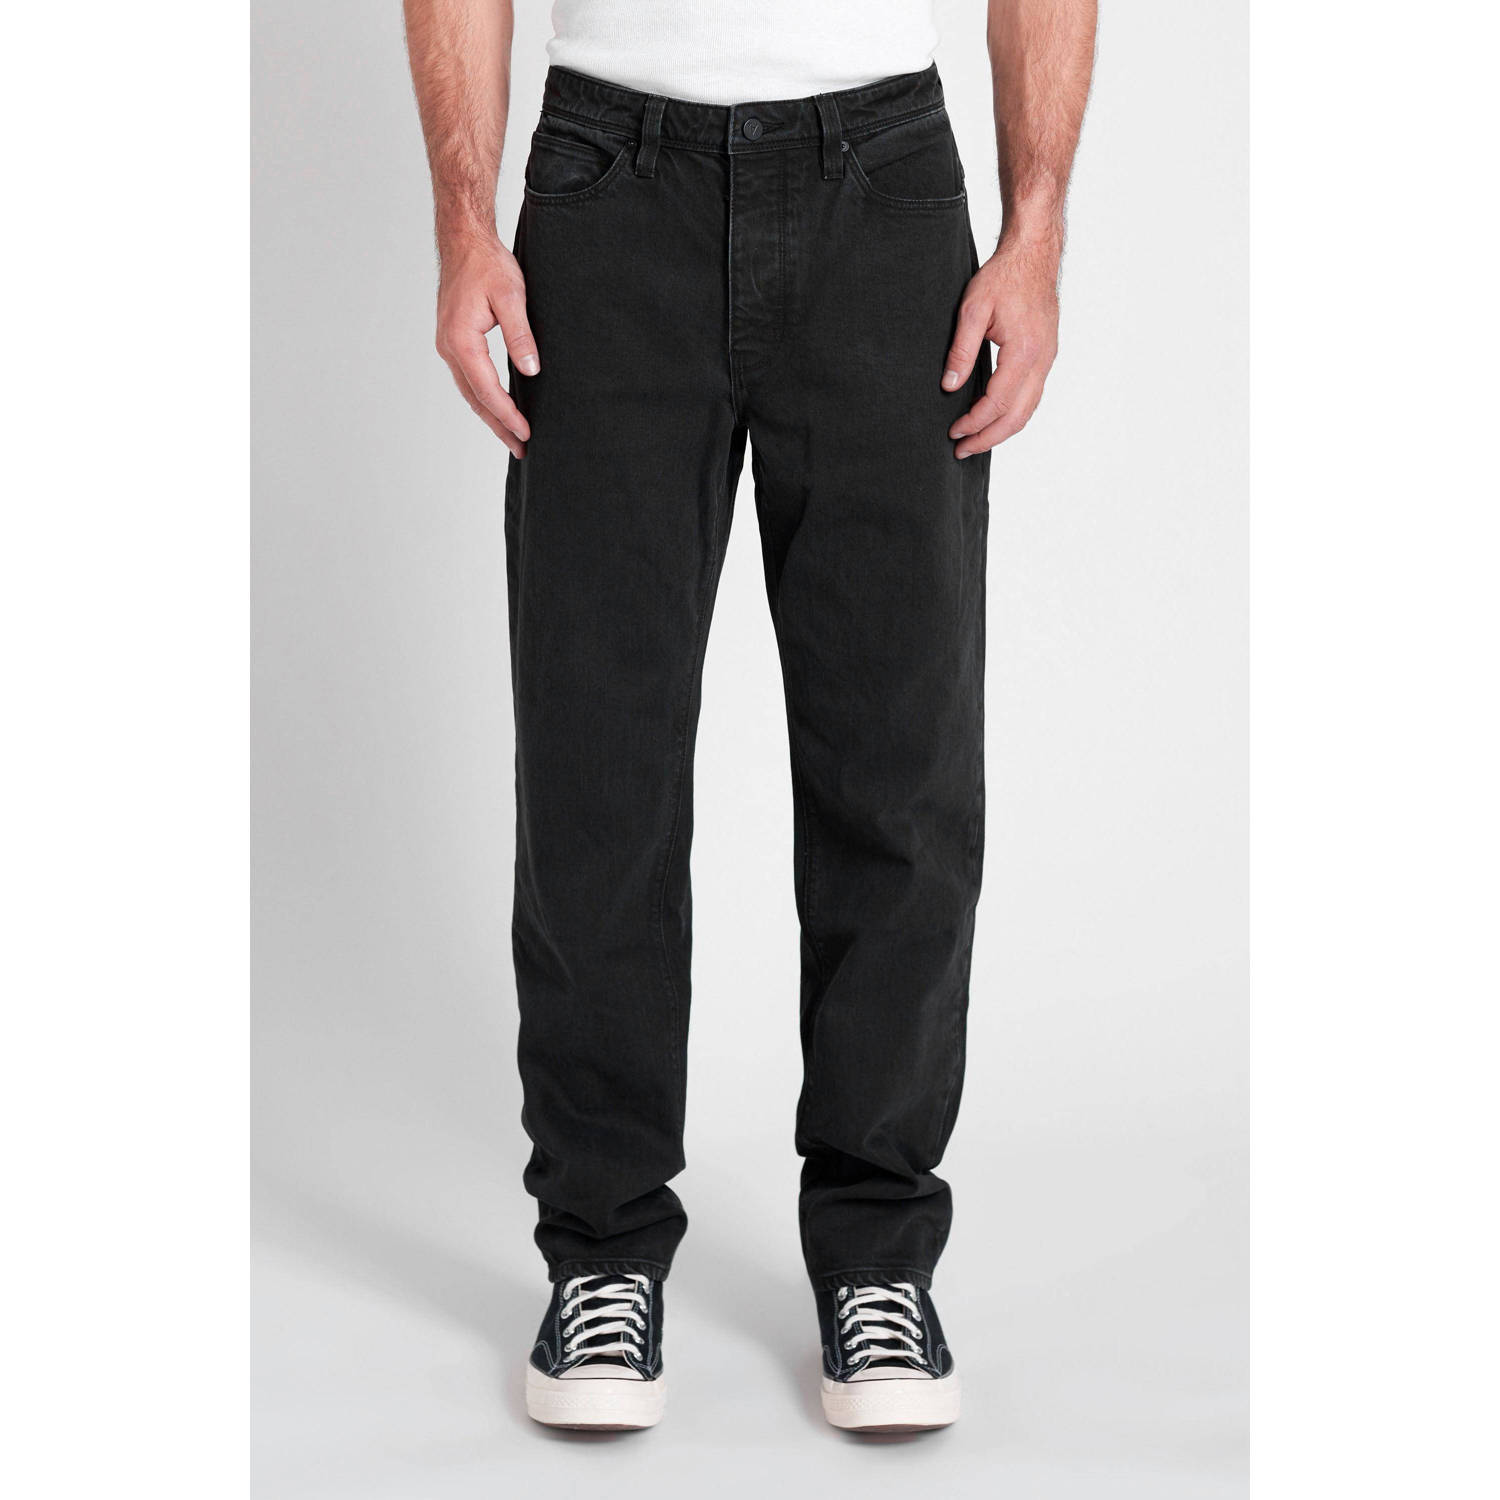 Abrand Jeans relaxed 90s jeans FADE black